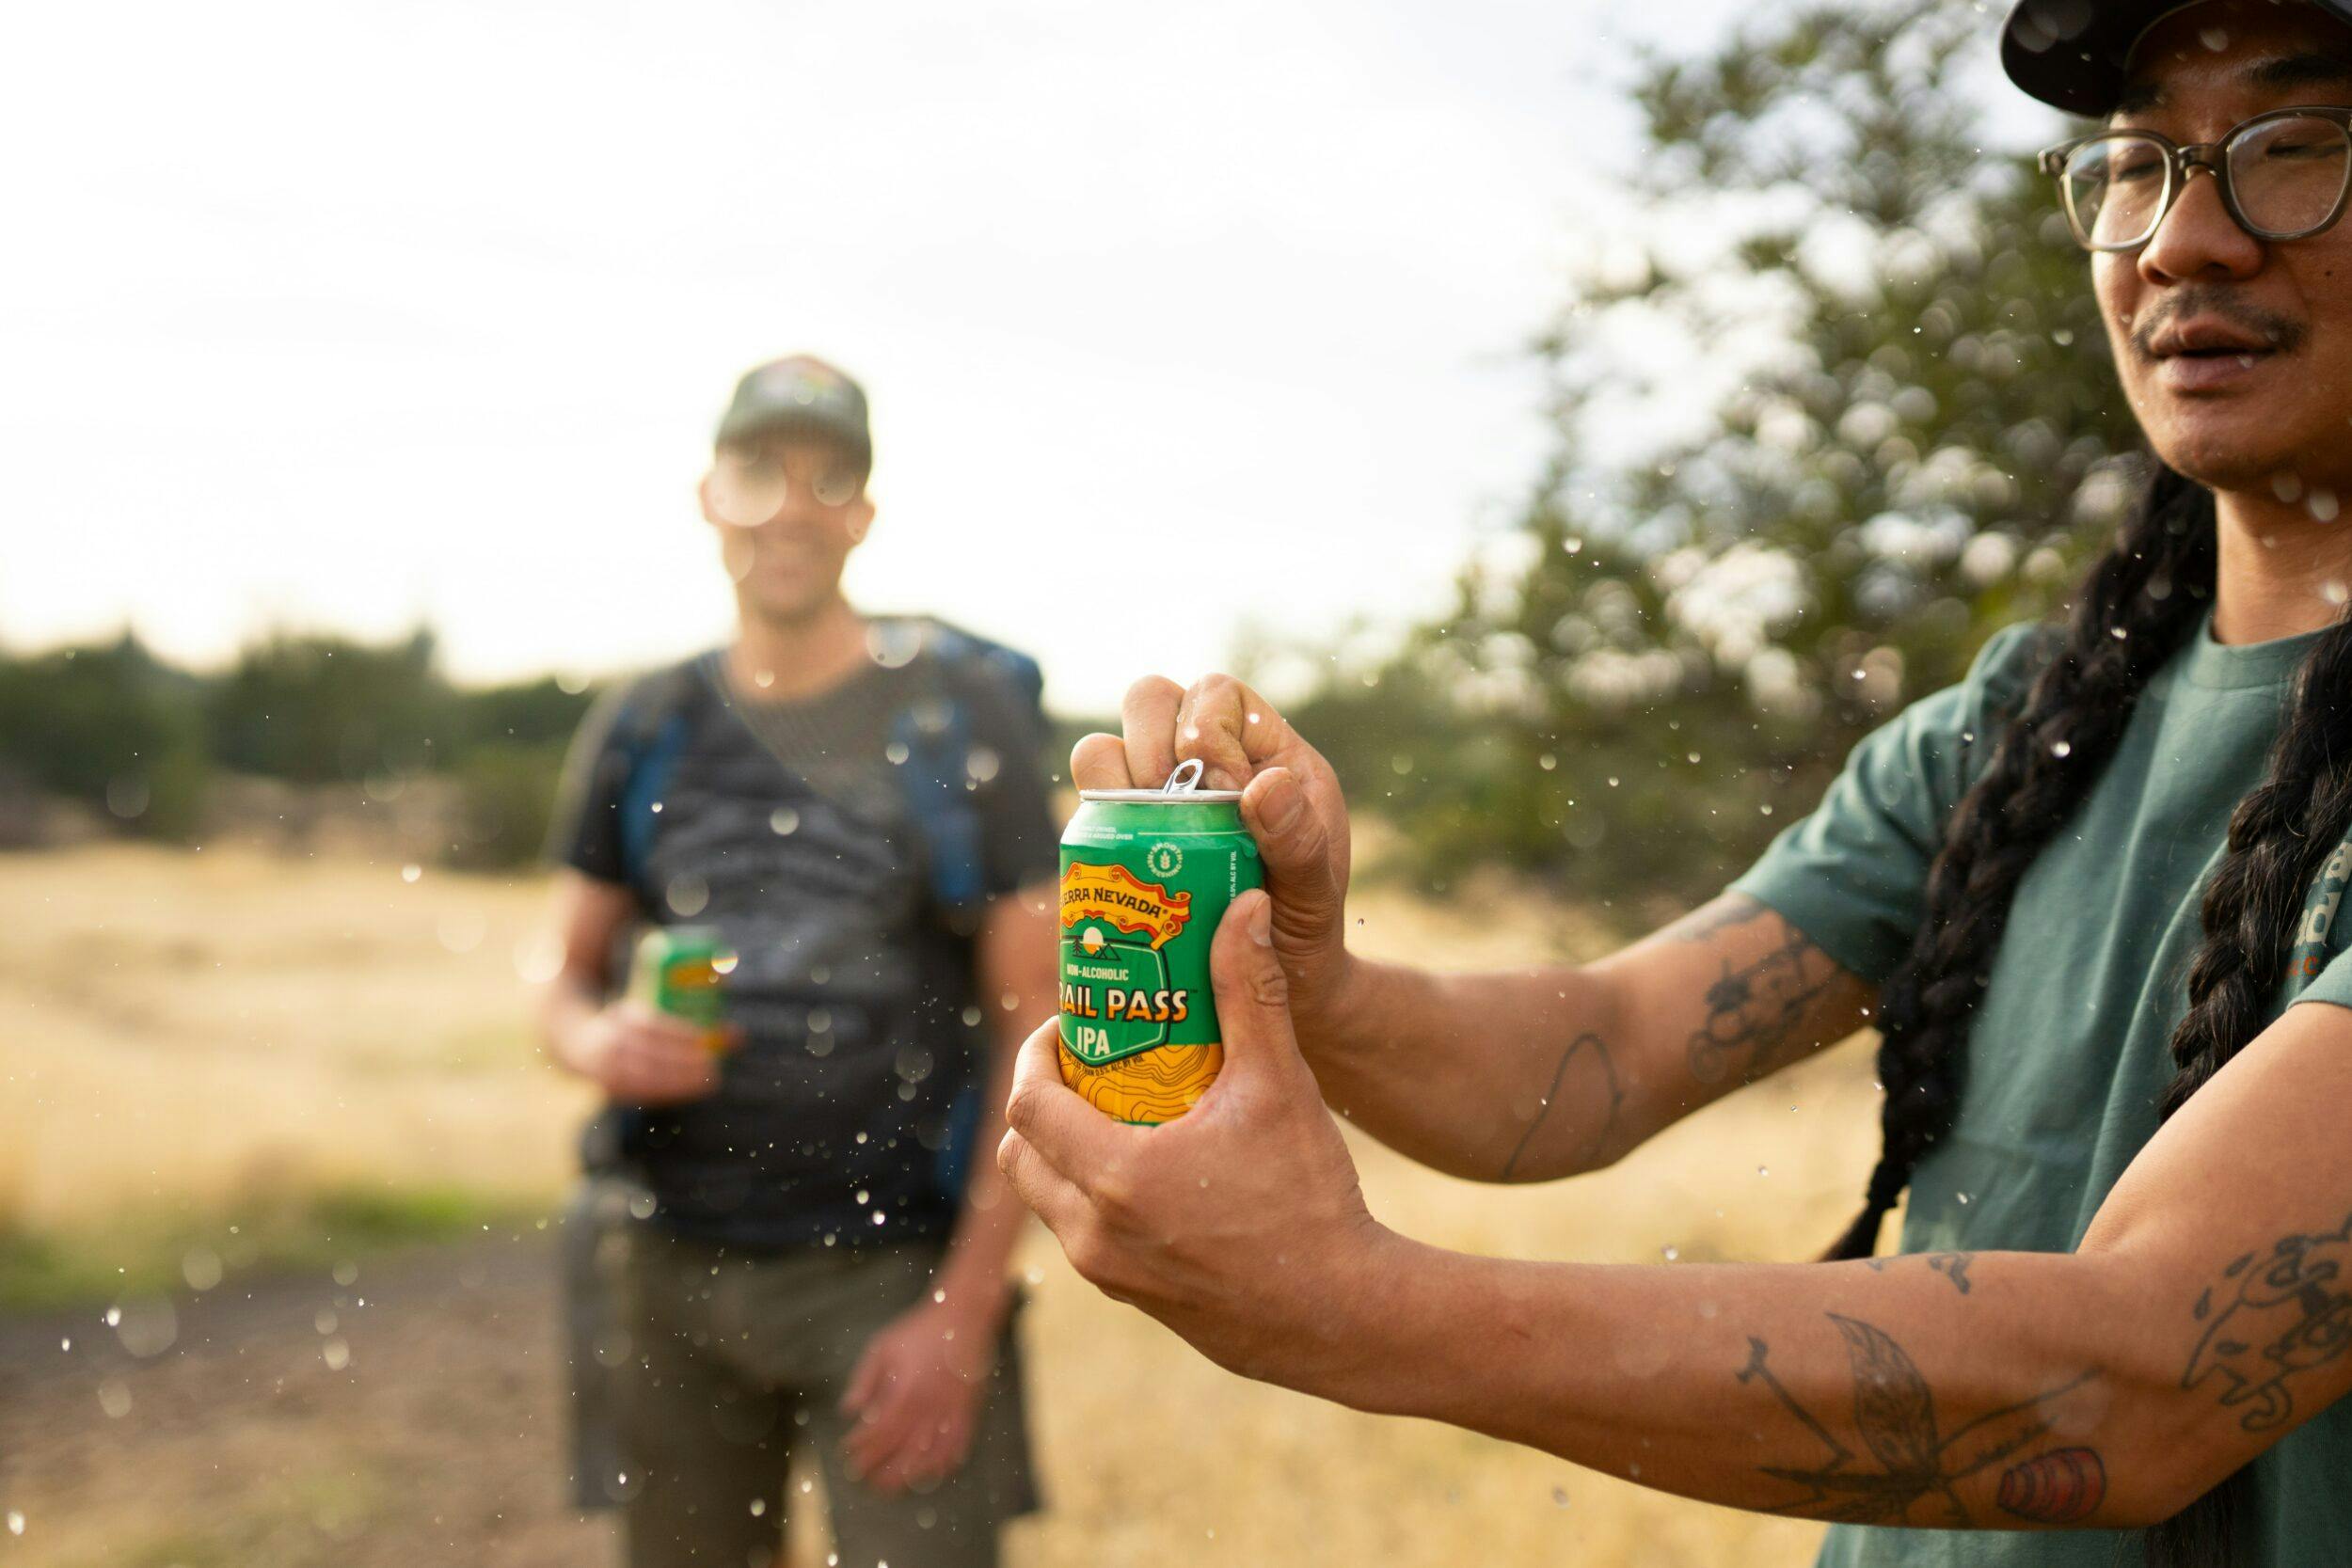 Two male hikers on a trail opening a can of non-alcoholic Sierra Nevada Trail Pass IPA